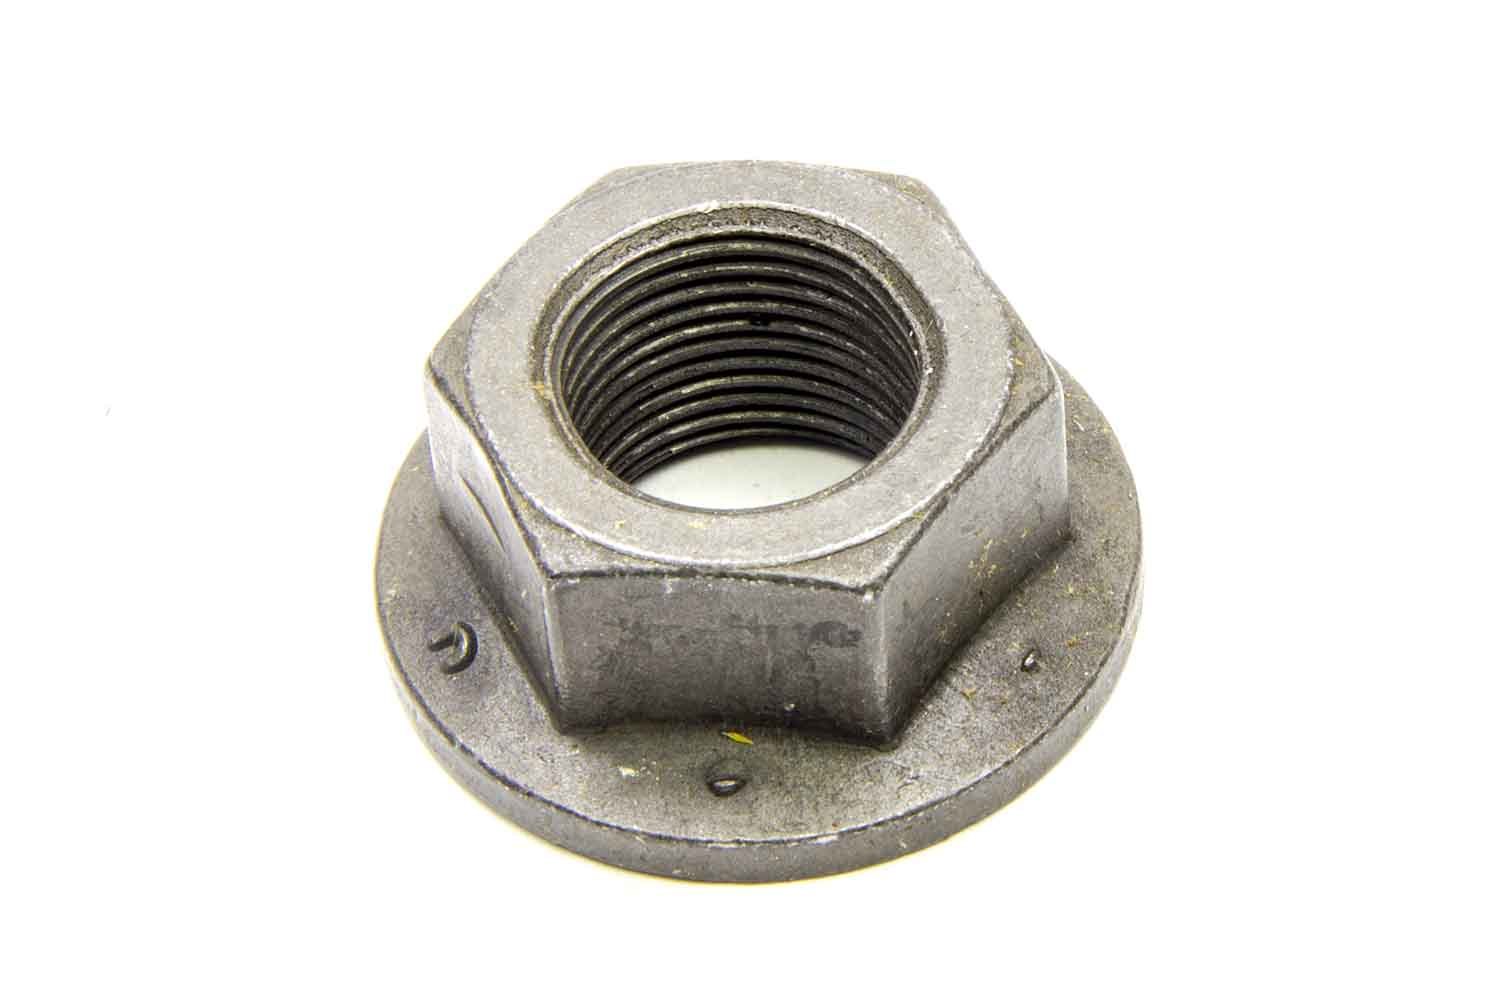 Ratech 1509 - Pinion Nut, 1-14 in Thread, Steel, Natural, Large Bearing Pinion Support, Ford 9 in, Each